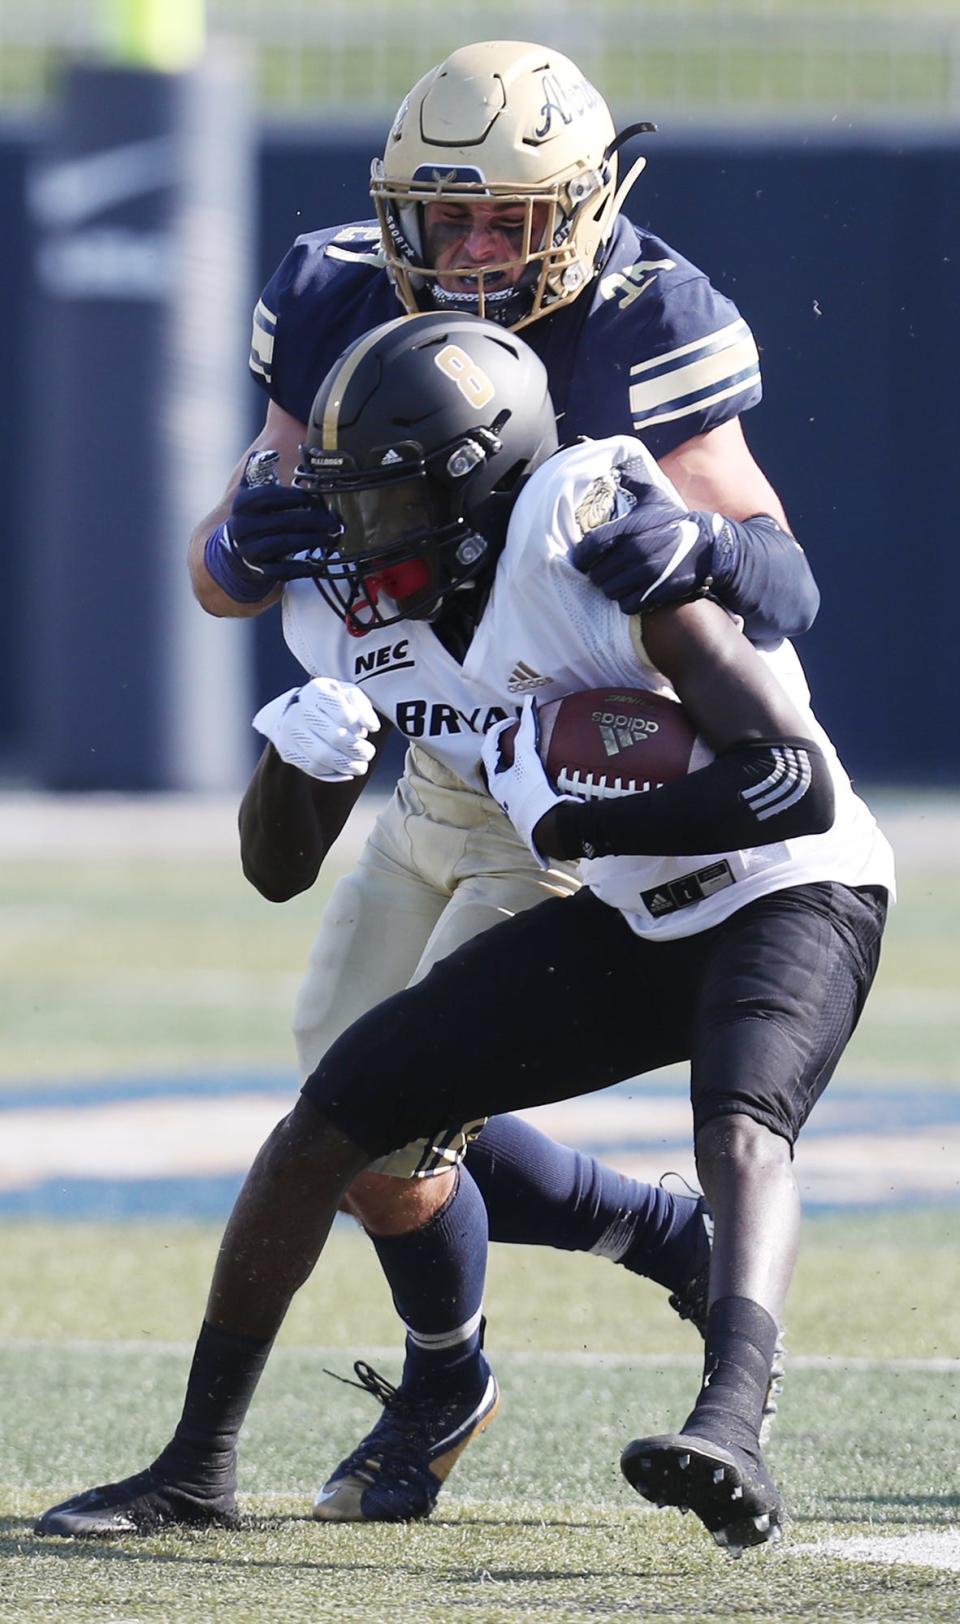 Akron Bubba Arslanian tackles Bryant Psaveon Reaves in the first half of their game at University of Akron InfoCision Stadium Summa Field on Saturday, Sept. 18, 2021, in Akron.